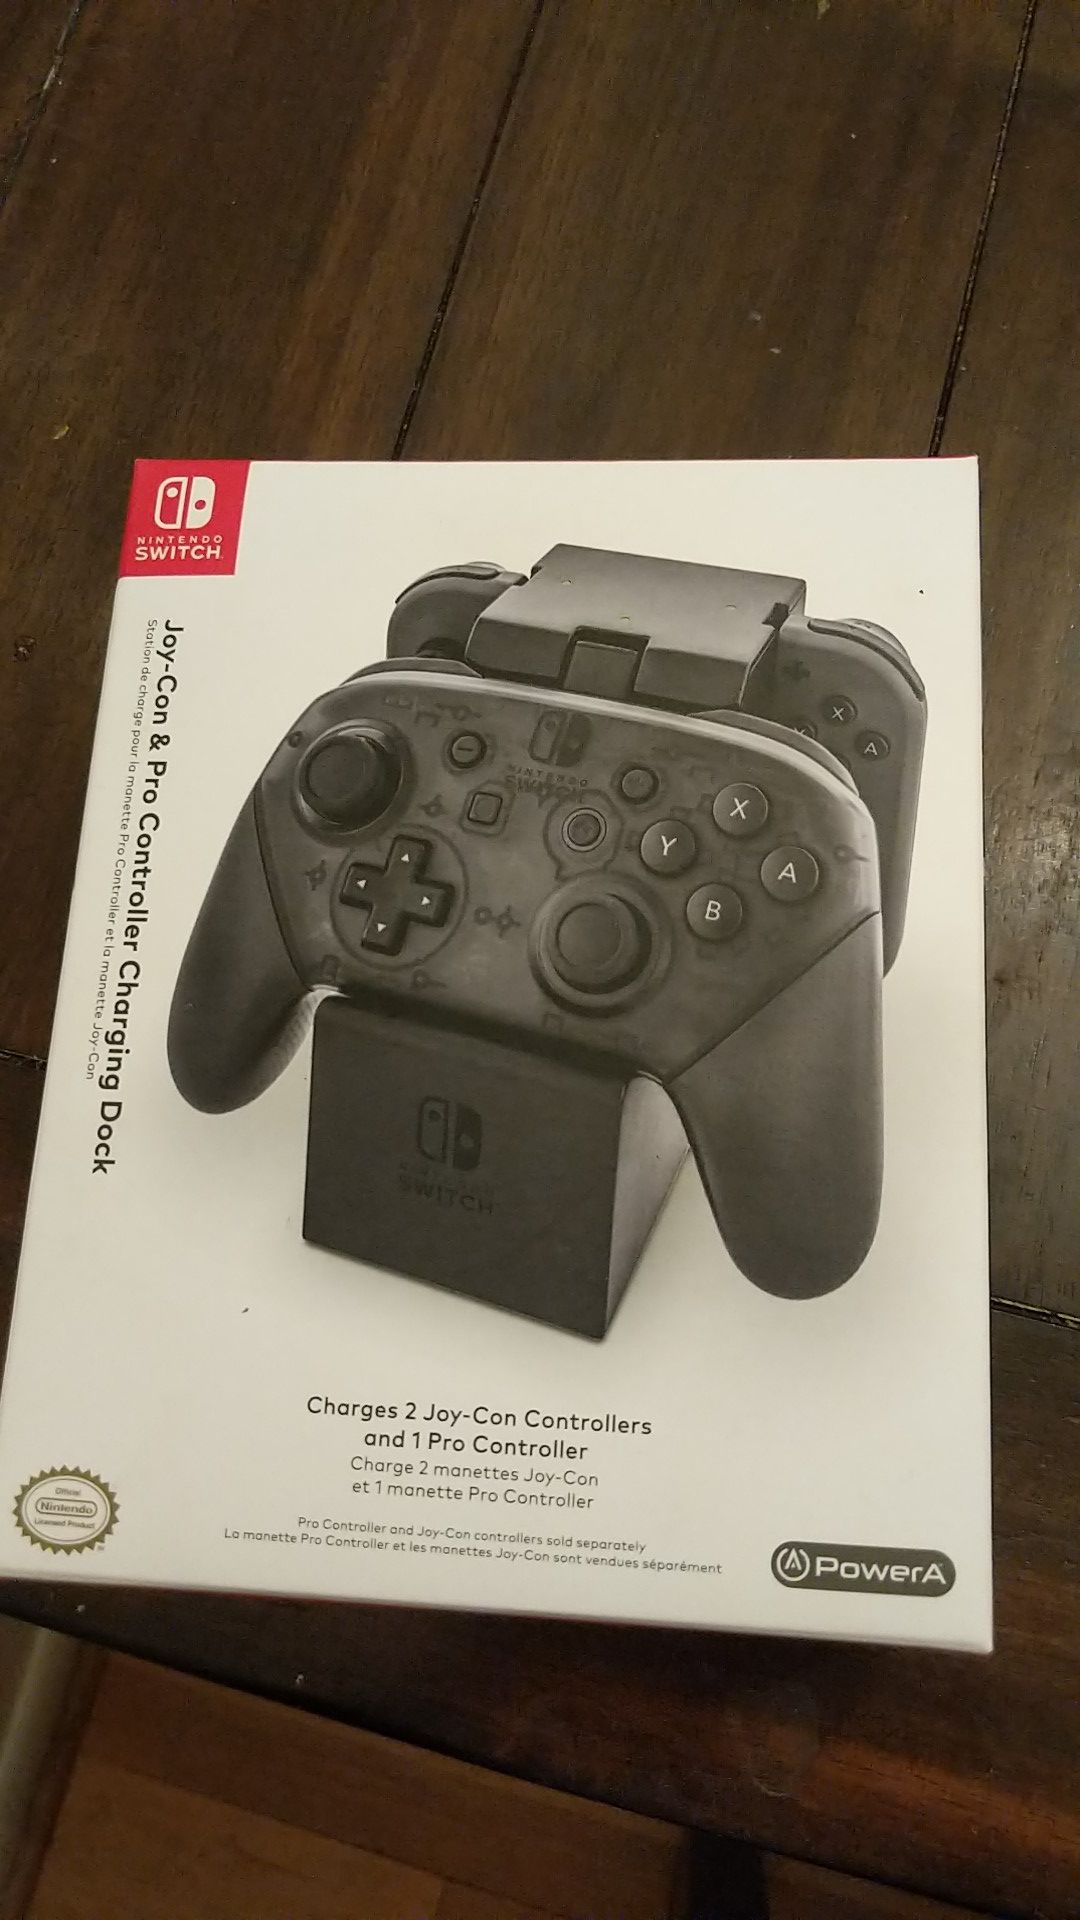 NEW PowerA Joy-Con & Pro Controller Charging Dock - Nintendo Switch. Condition is New.